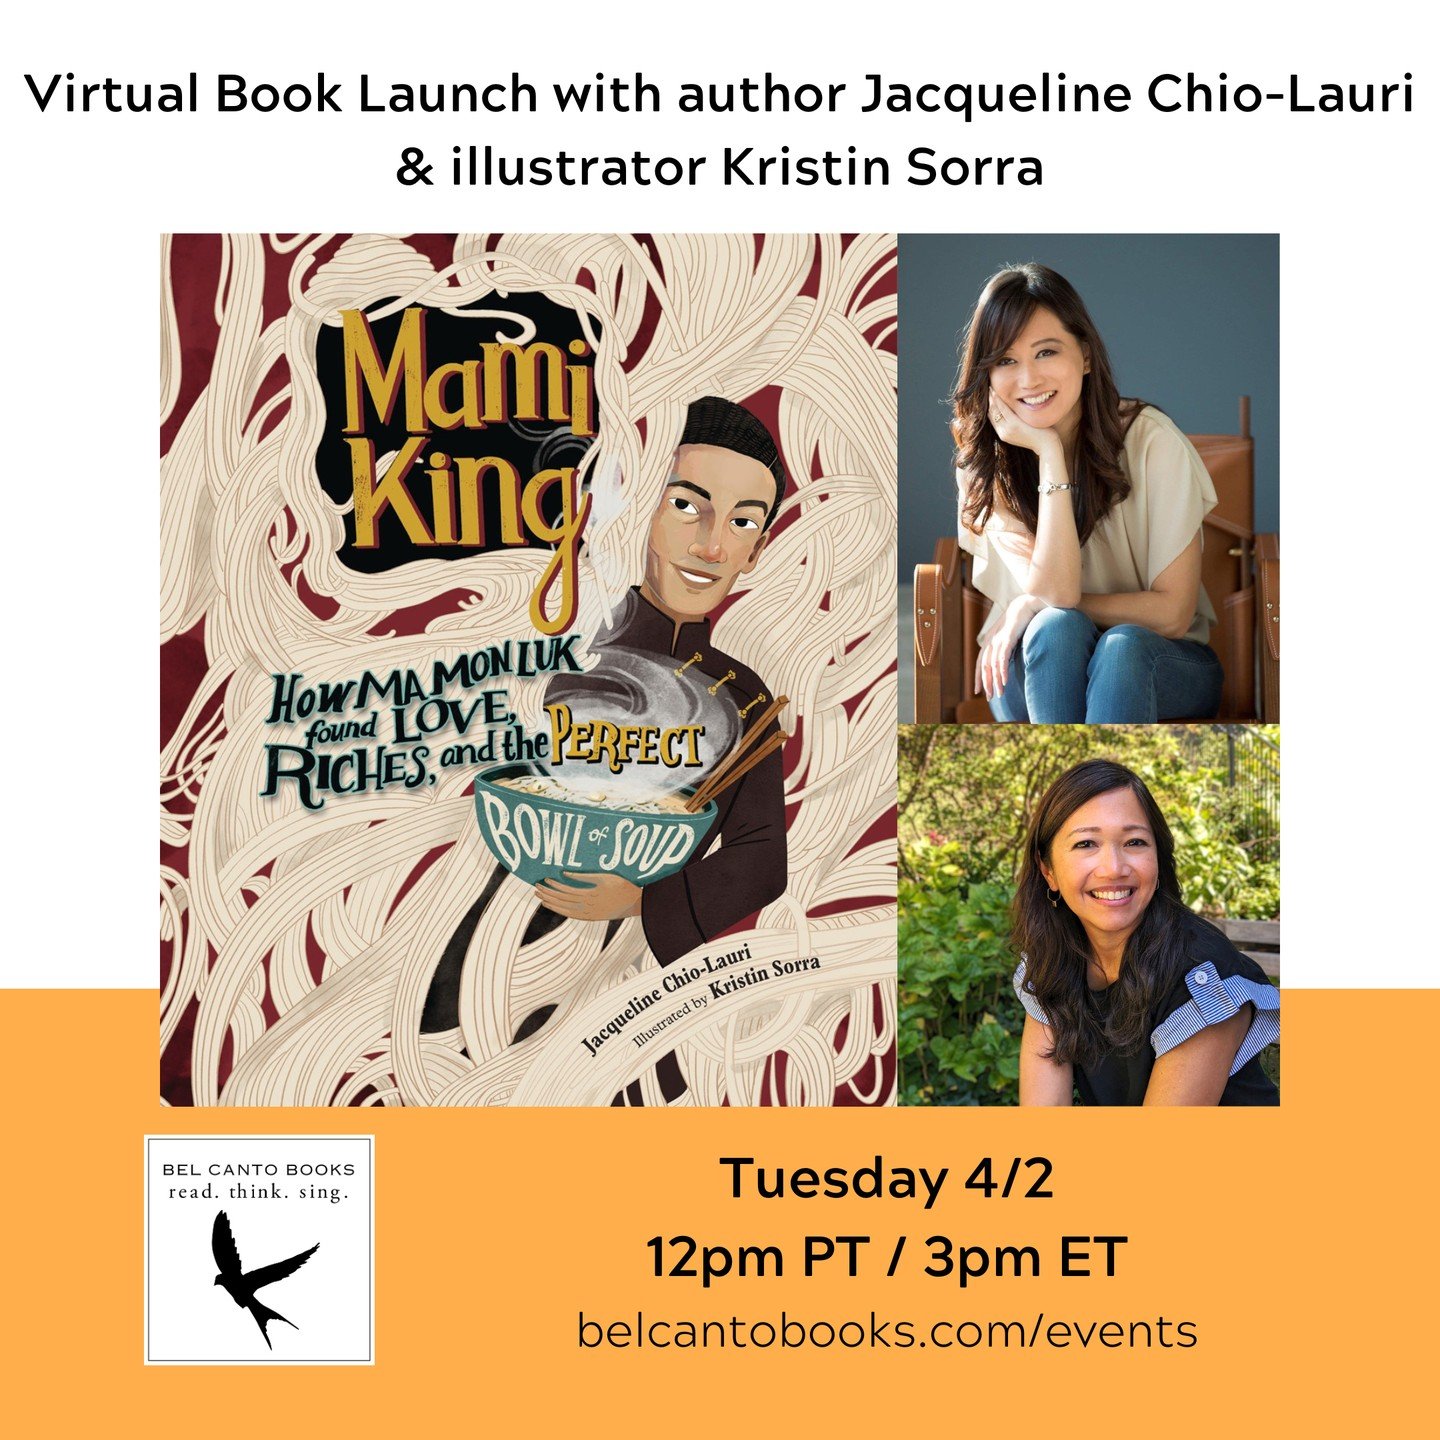 I am so thrilled to announce that @belcantobooks will be hosting a live virtual book launch for MAMI KING, with me and Jacqueline Chio-Lauri @myfoodbeginnings on Tuesday, April 2nd at 12pm PT/3pm ET. You can reserve your free spot at https://www.even